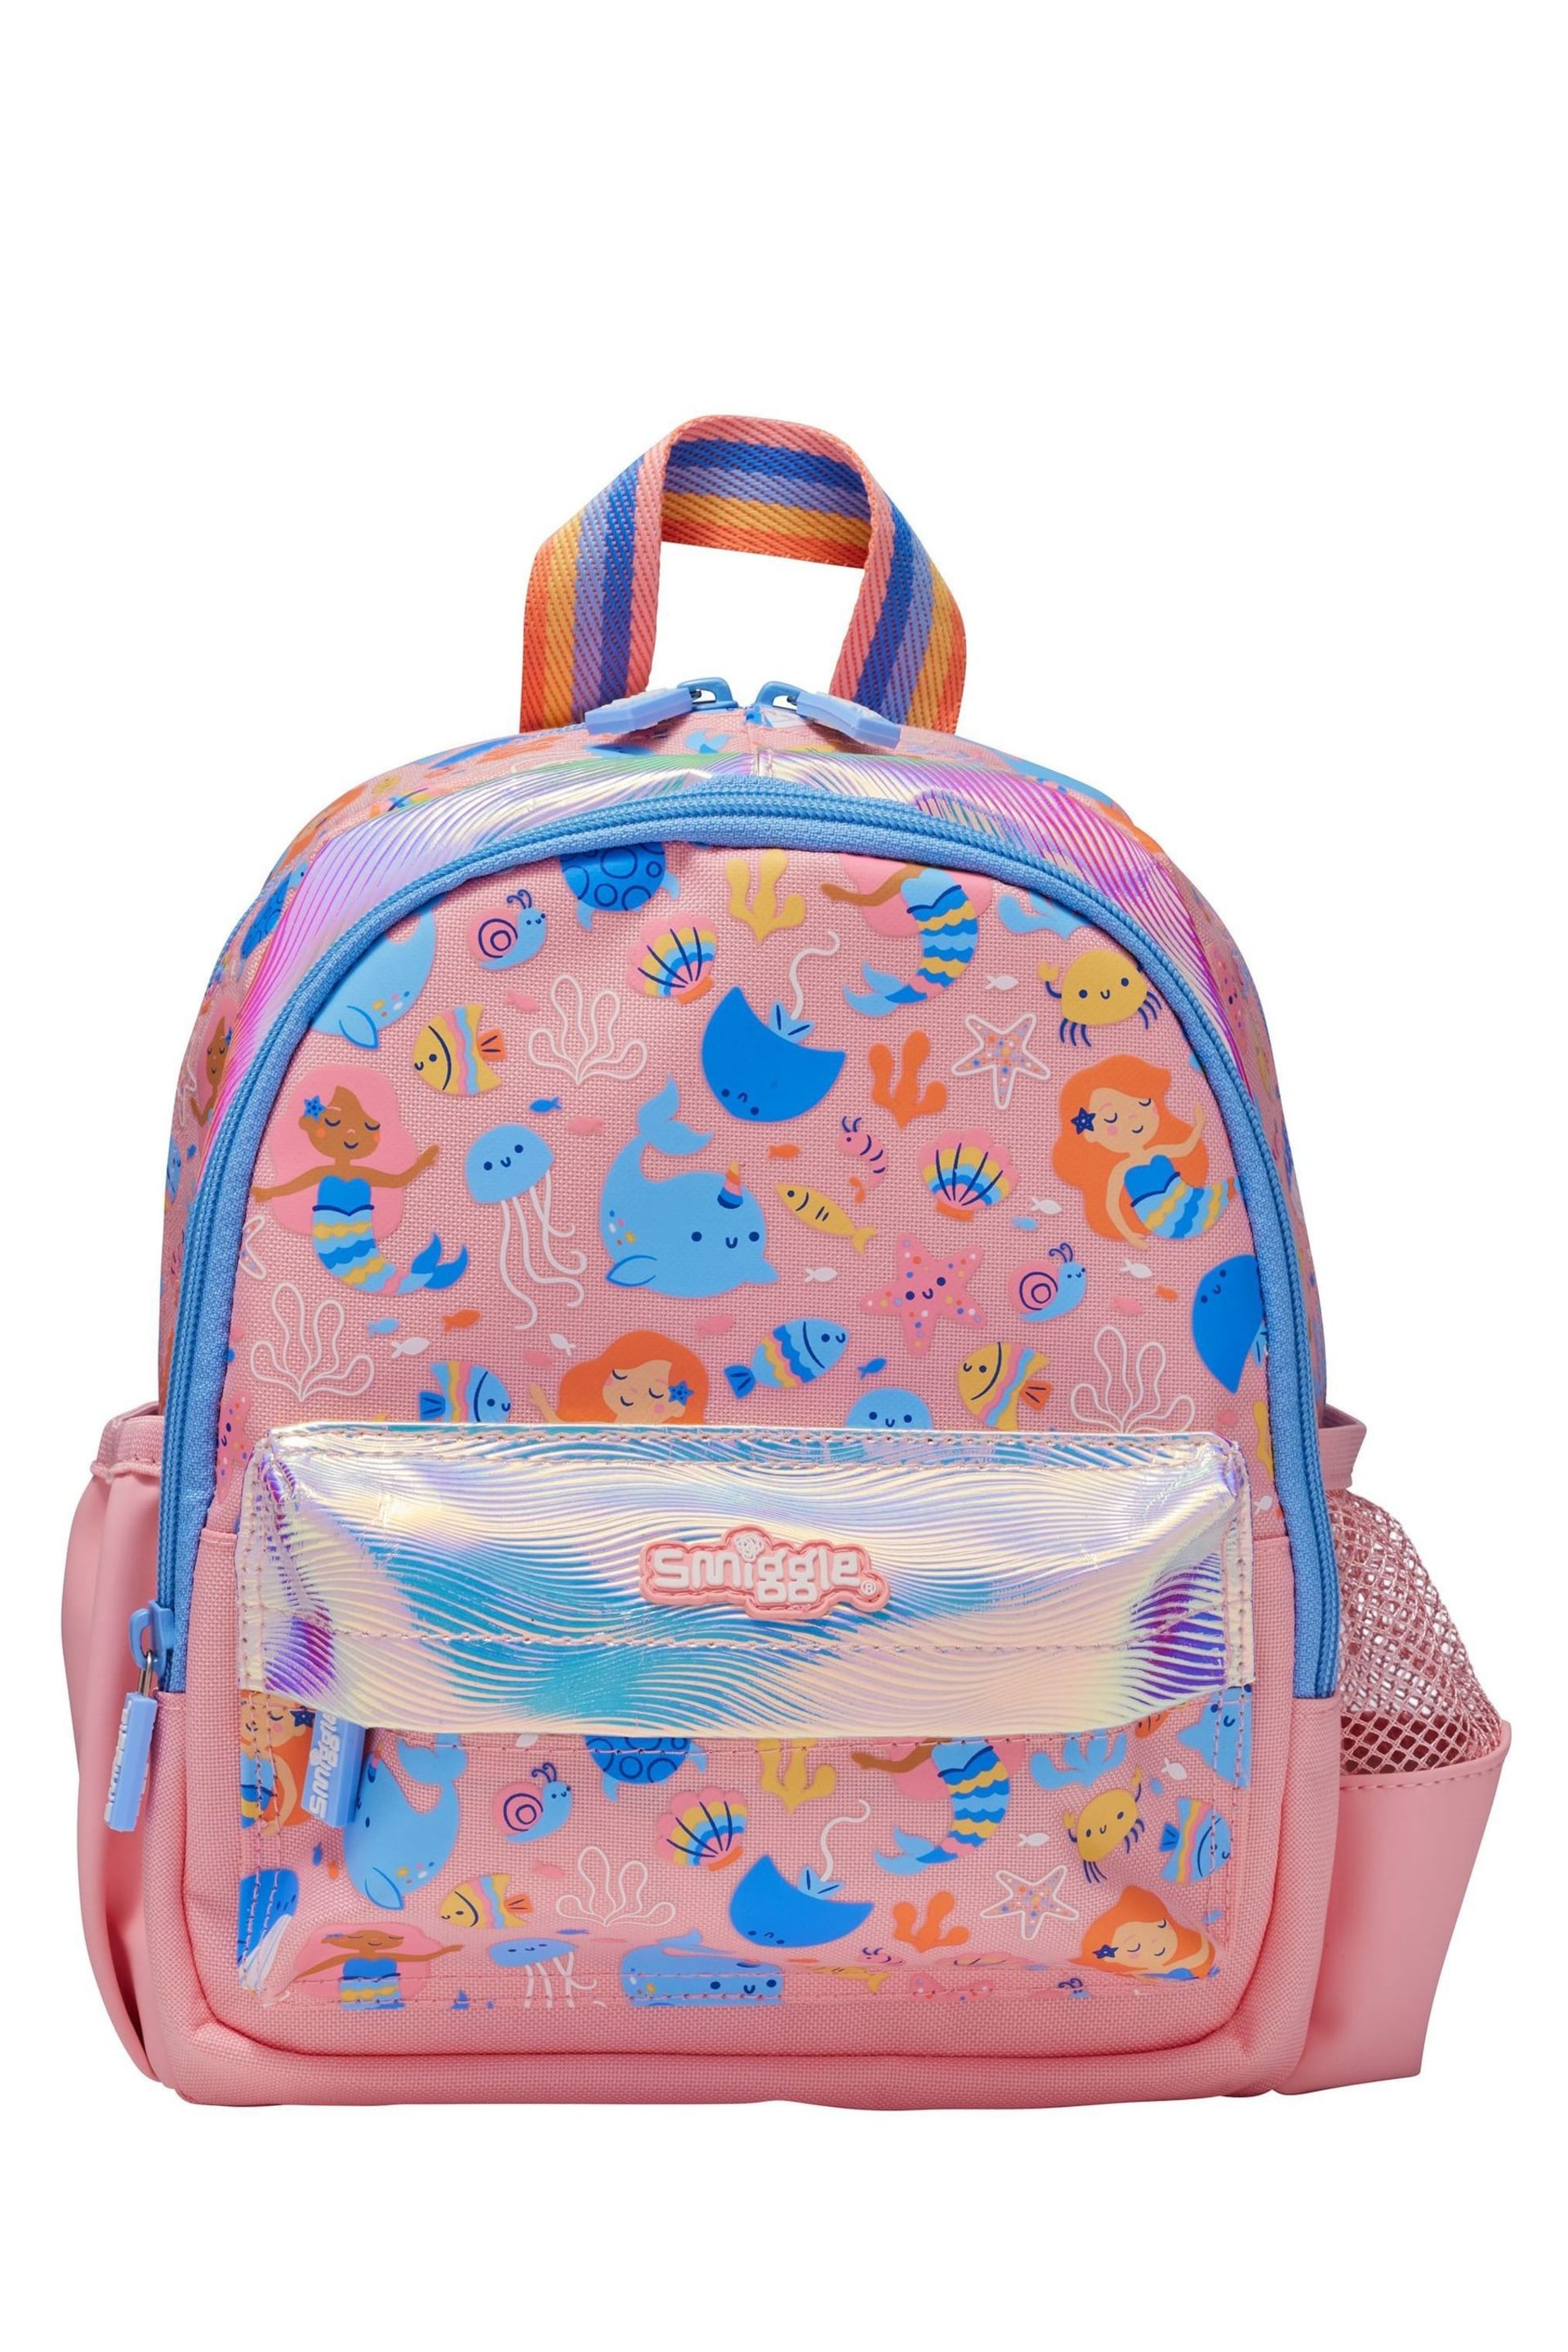 Smiggle Pink Over and Under Teeny Tiny Backpack - Image 3 of 4